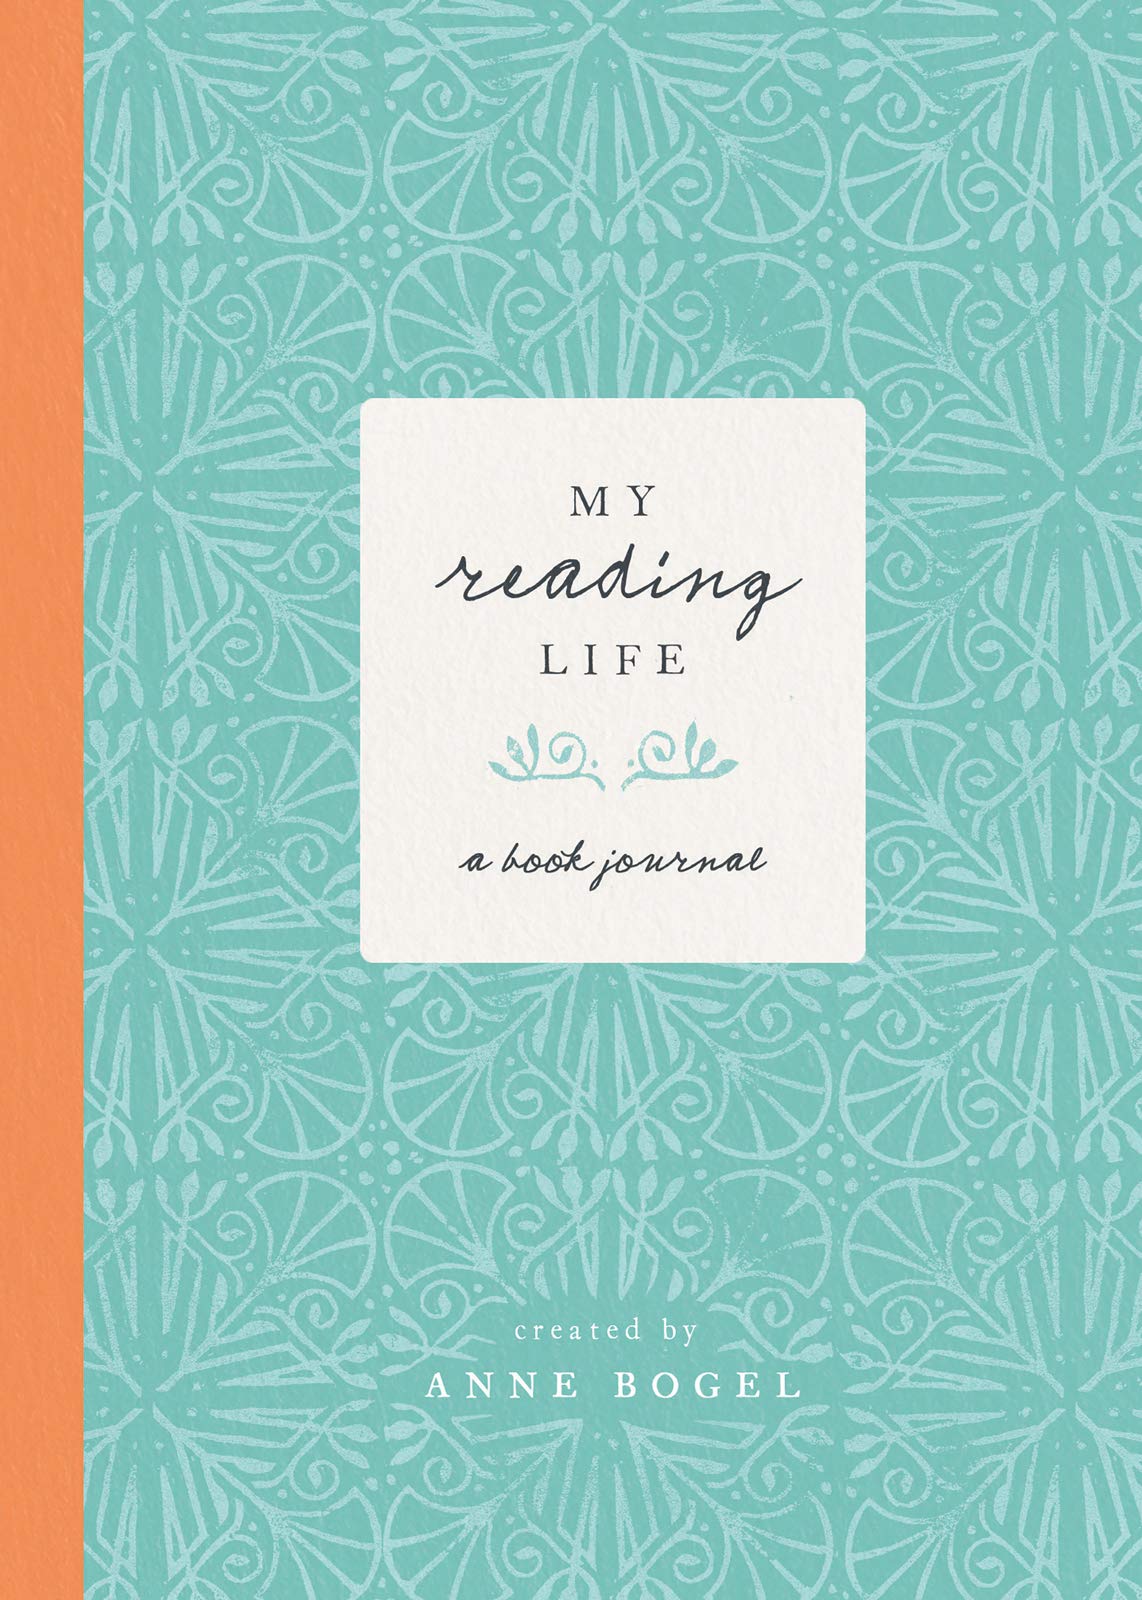 My Reading Life: A Book Journal created by Anne Bogel